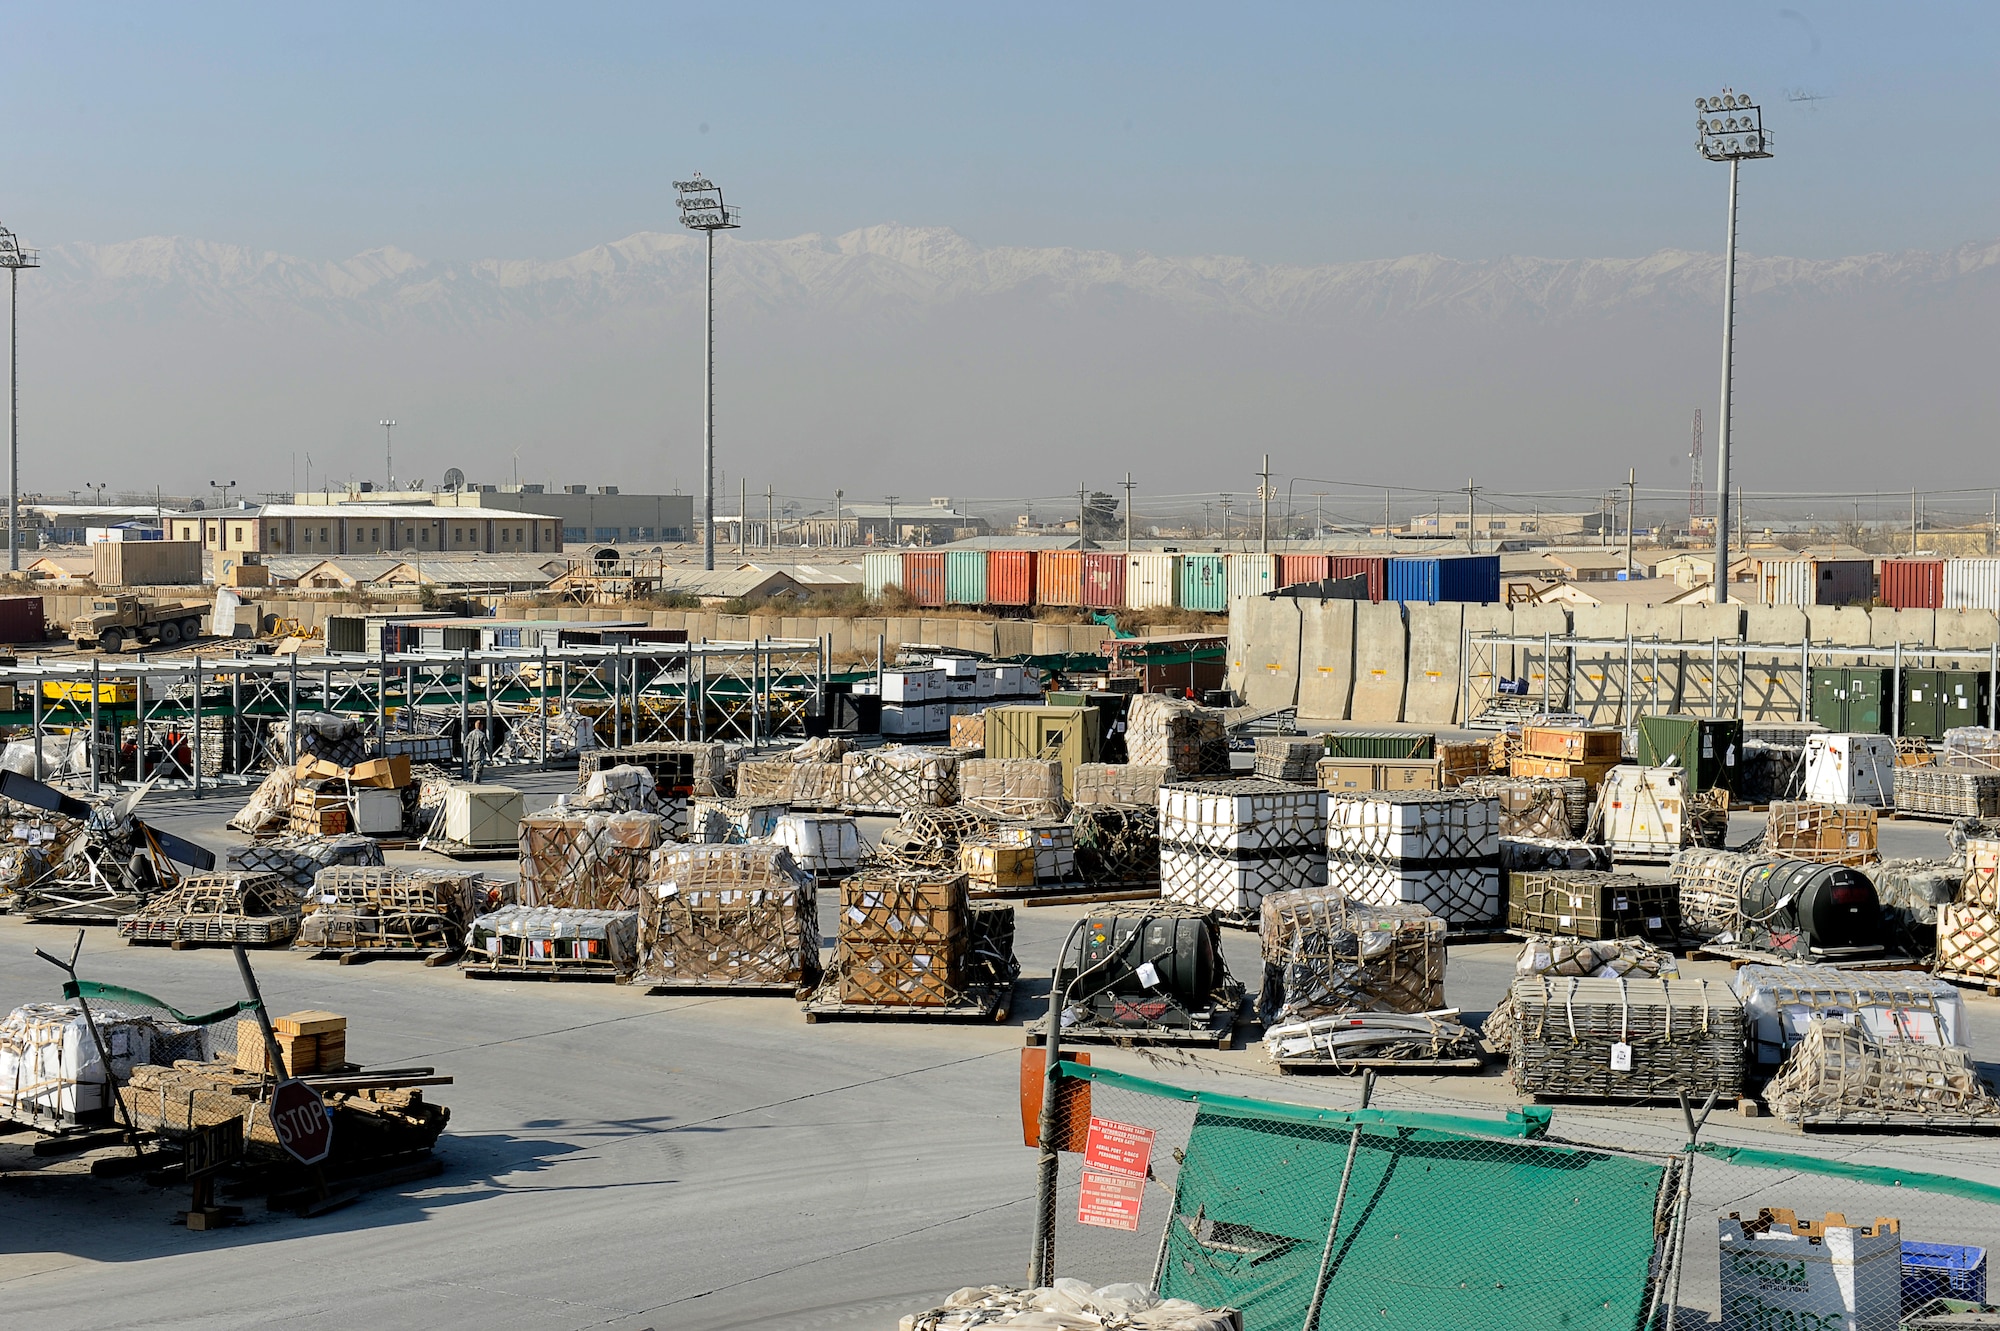 BAGRAM AIRFIELD, Afghanistan-- From Sept. 1, 2009 thru Dec. 31, 2009, the Airmen of the 455th Expeditionary Aerial Port Squadron moved over 67 thousand short tons of cargo thru Bagram Airfield, Afghanistan.   (U.S. Air Force photo by: Tech. Sgt. Jeromy K. Cross)